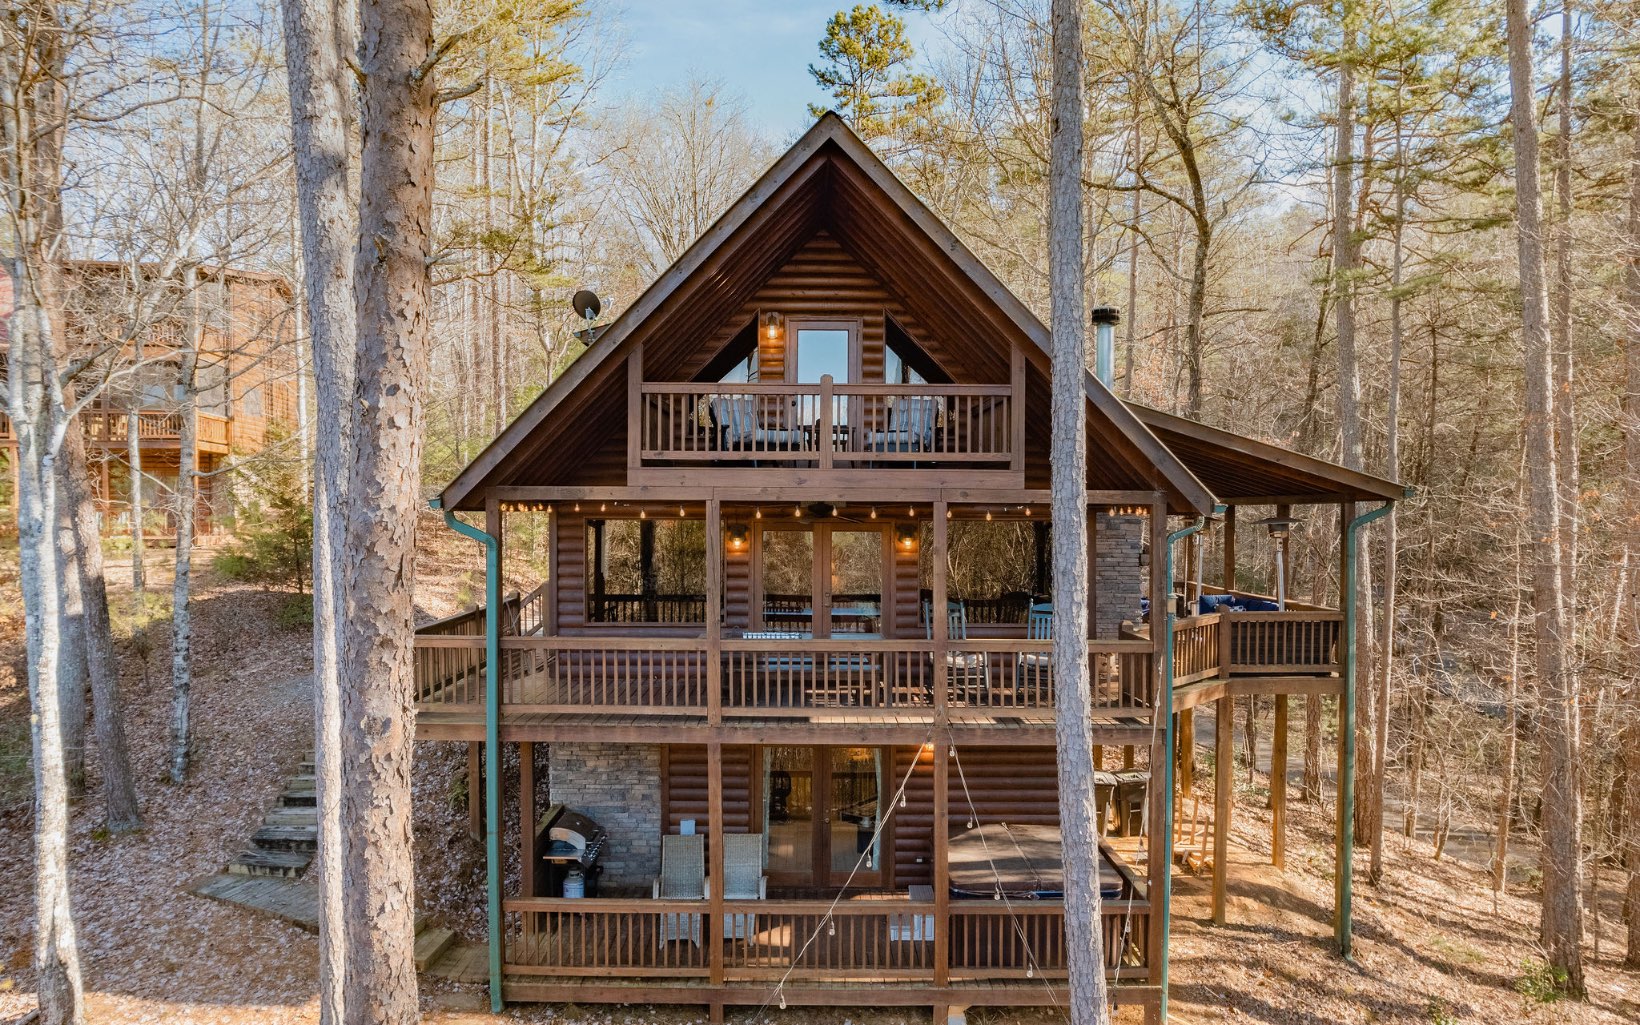 Highly coveted and sought after Aska Adventure Area cabin retreat. Cabin is immaculately maintained and nicely furnished. Property is within walking distance to the Shallowford Bridge on the Toccoa River and all of the fun activities the area has to offer. Activities range from hiking trails, river rapids, dining, gem mining and much more. This spacious cabin will sleep 8 comfortably. Enjoy mountain views, while relaxing in the hot tub or reading a book while chilling on the queen size daybed swing. This cabin literally has it all! Established Rental.